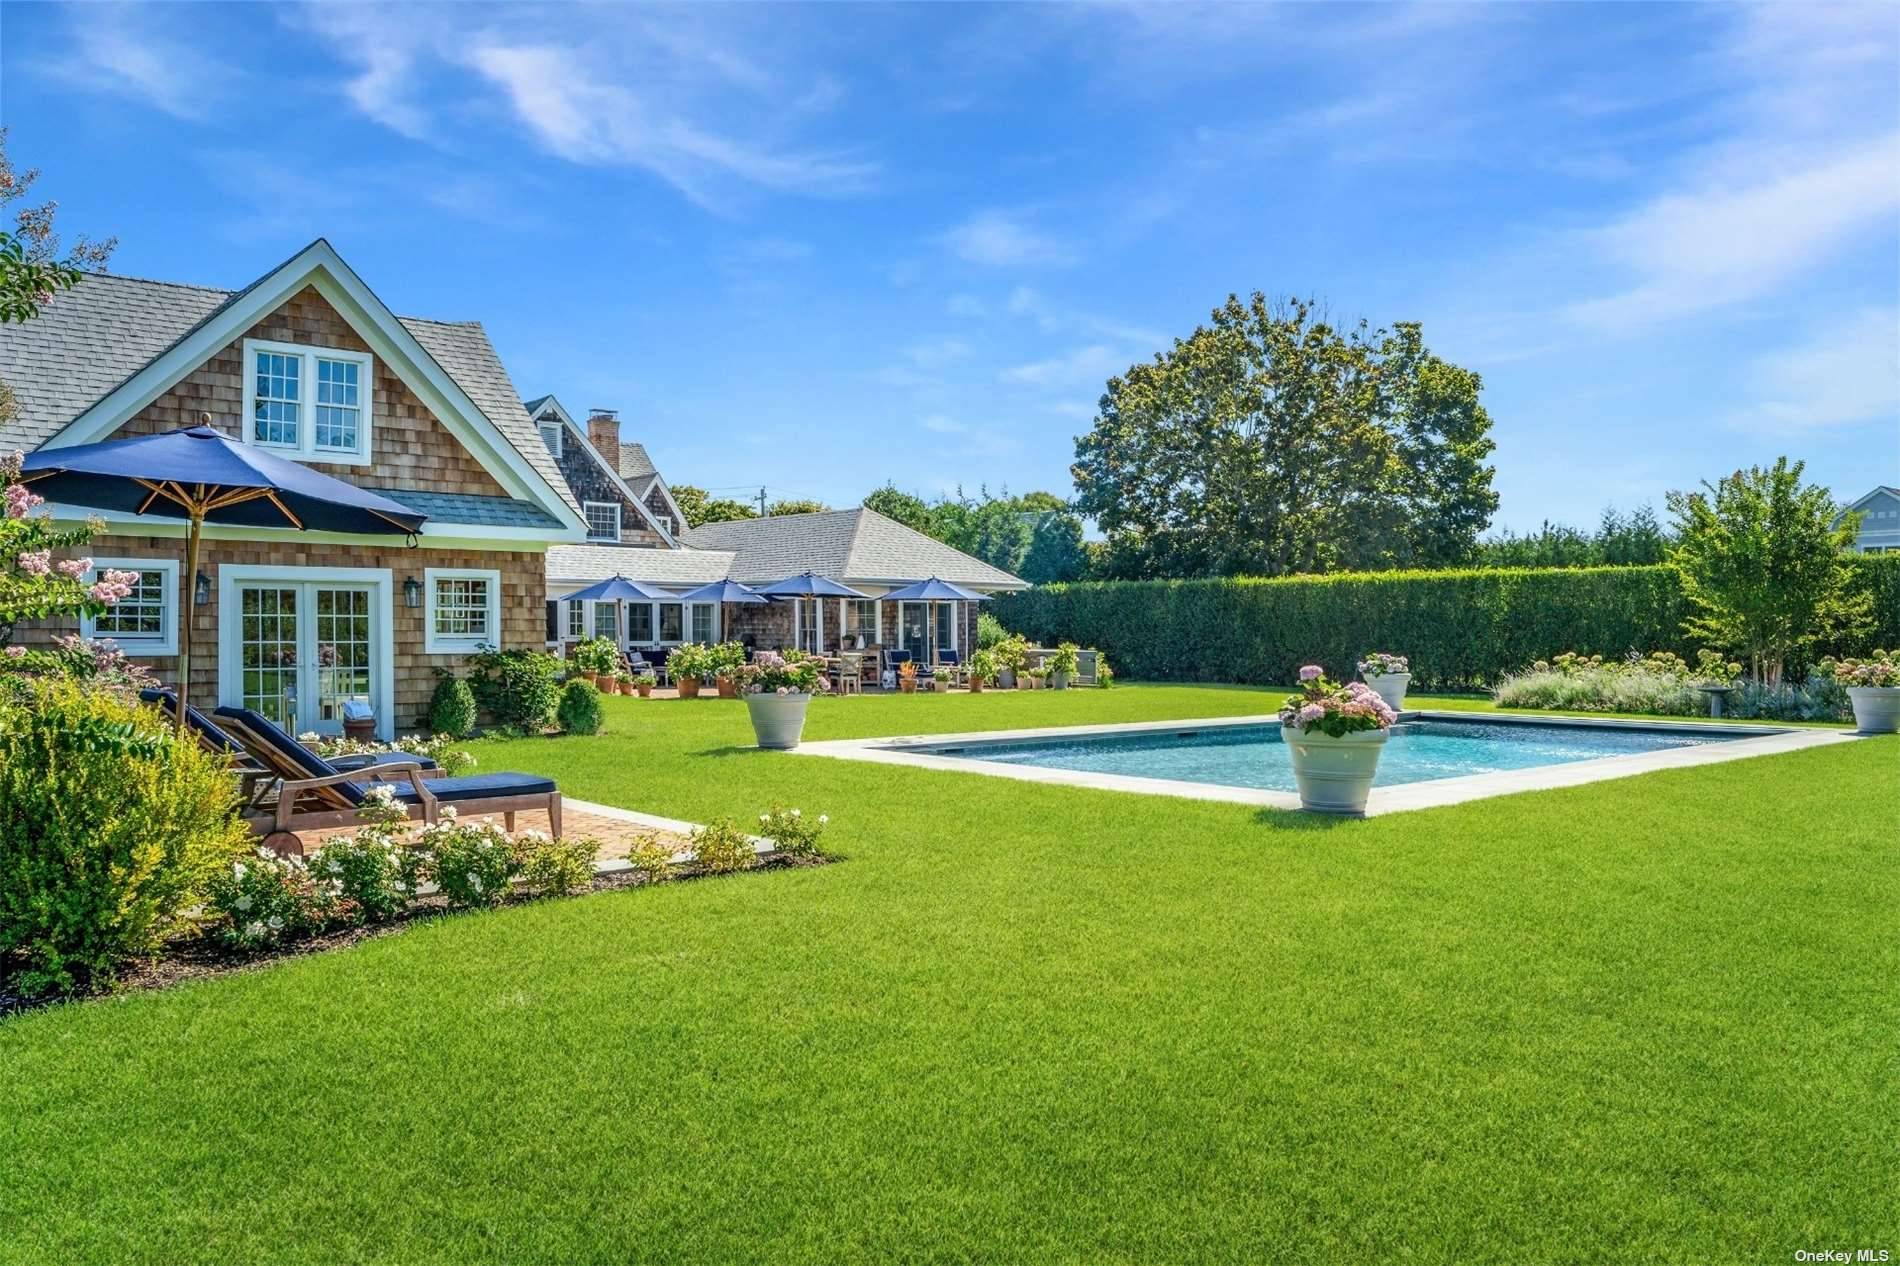 Welcome to Nestledown, a quintessential, historic summer home located in the heart of Quogue Village.